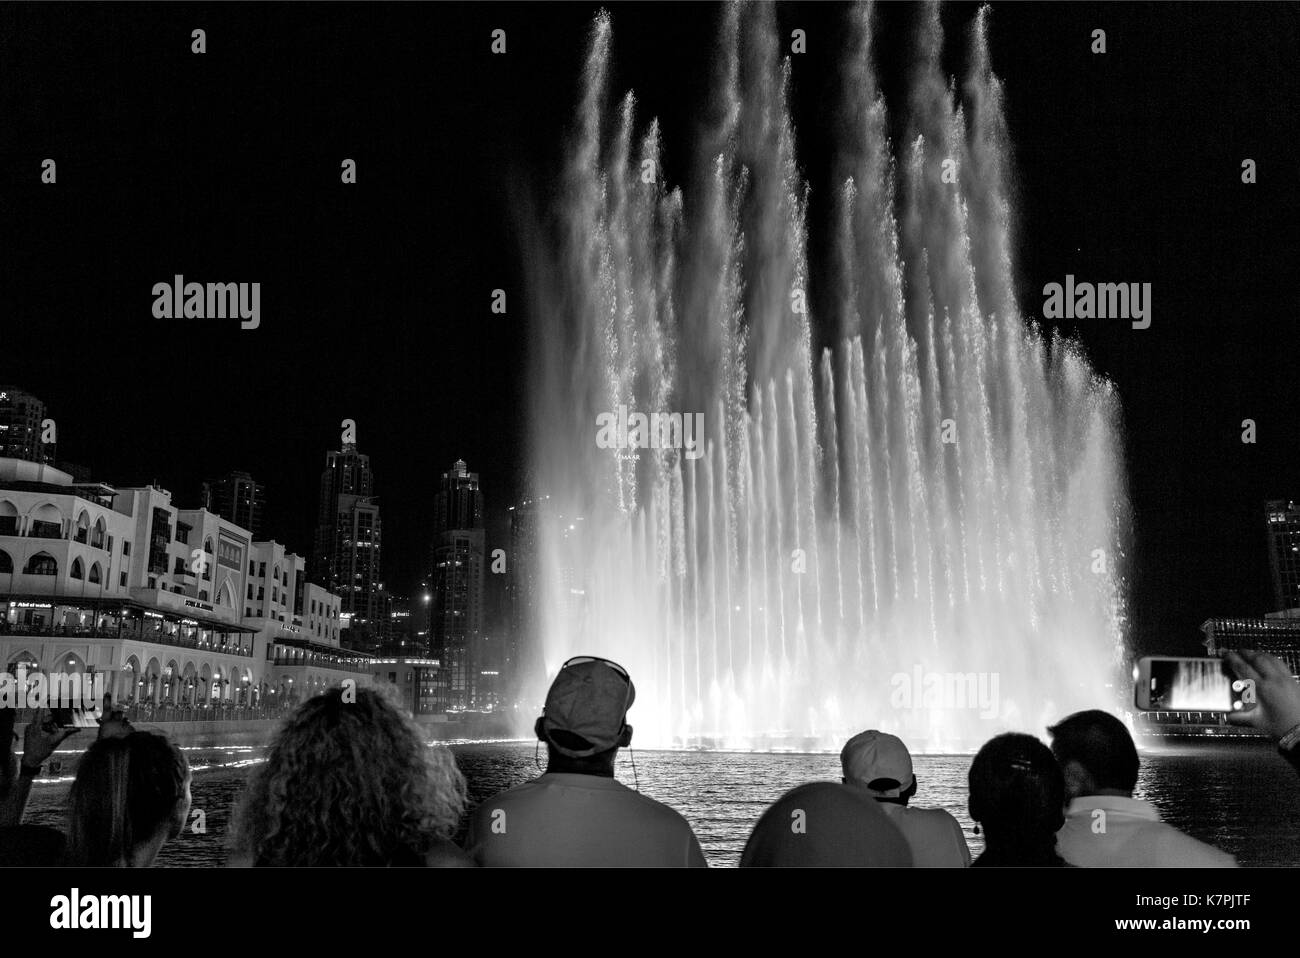 The Dubai Fountain is the world’s second largest choreographed fountain with a breathtaking show of sights and sounds. Stock Photo